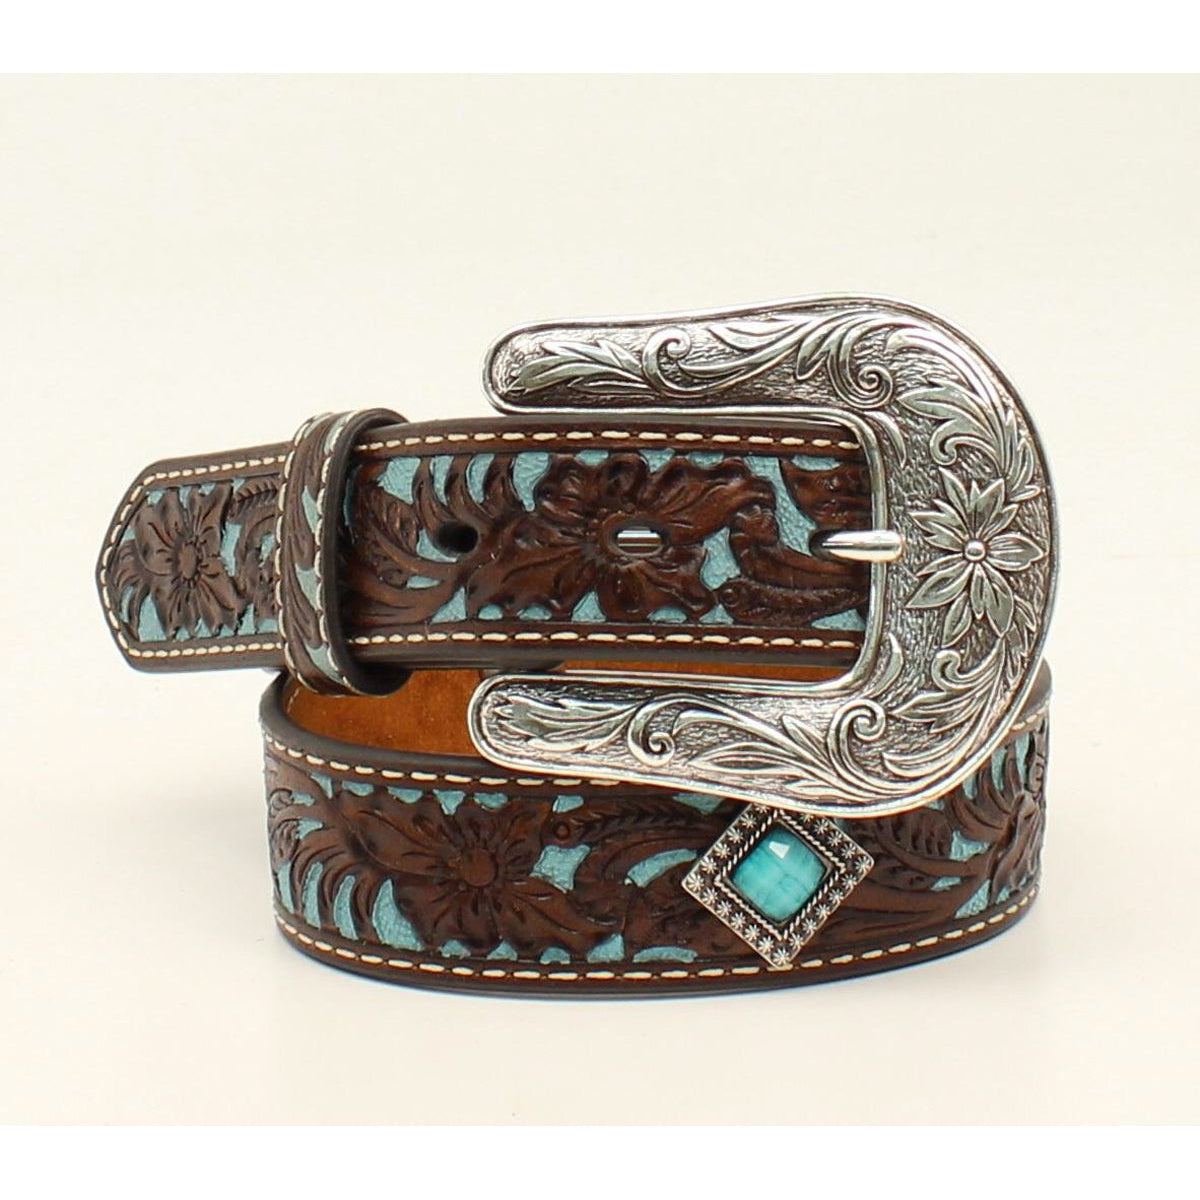 Ariat Girl's Floral Inlay Concho Fashion Belt - Dark Brown/Turquoise